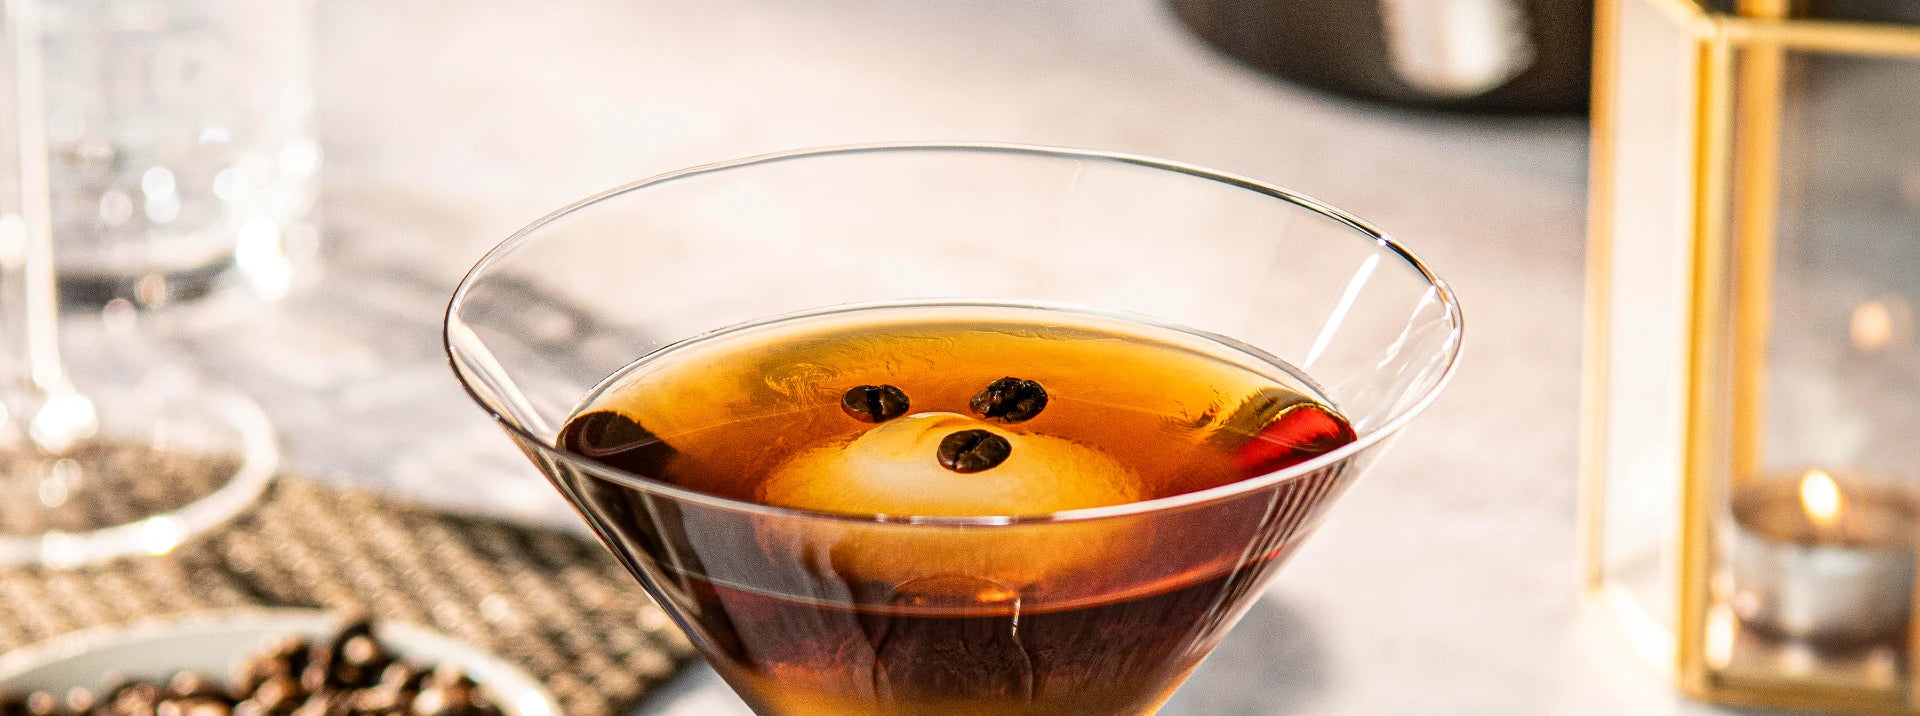 detail of martini glass with a coffee cocktail inside with coffee beans